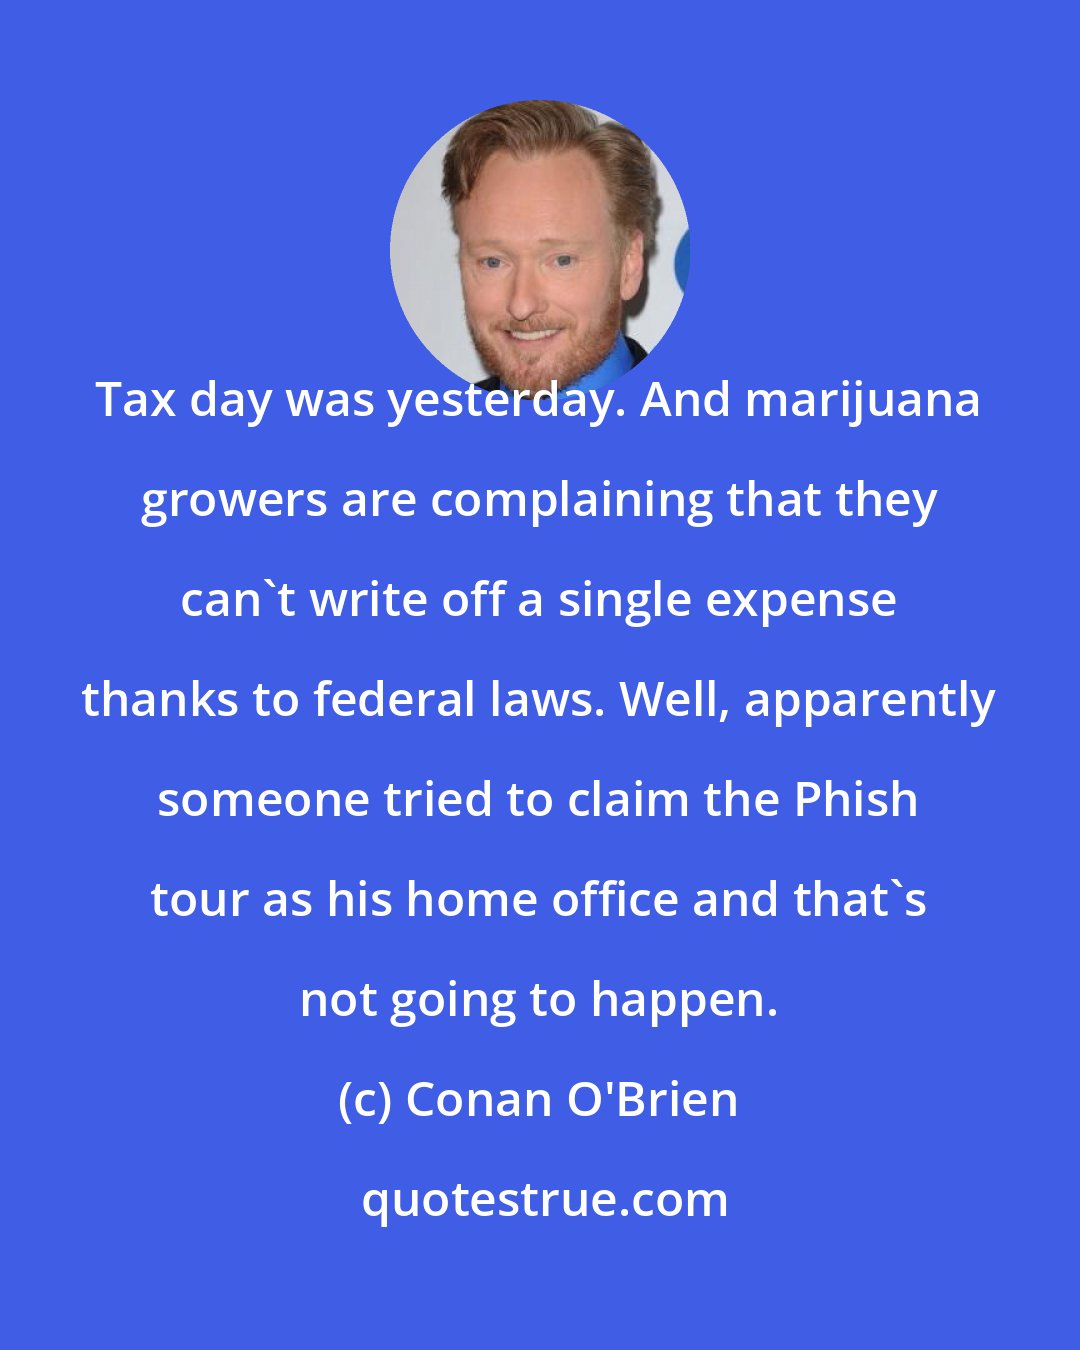 Conan O'Brien: Tax day was yesterday. And marijuana growers are complaining that they can't write off a single expense thanks to federal laws. Well, apparently someone tried to claim the Phish tour as his home office and that's not going to happen.